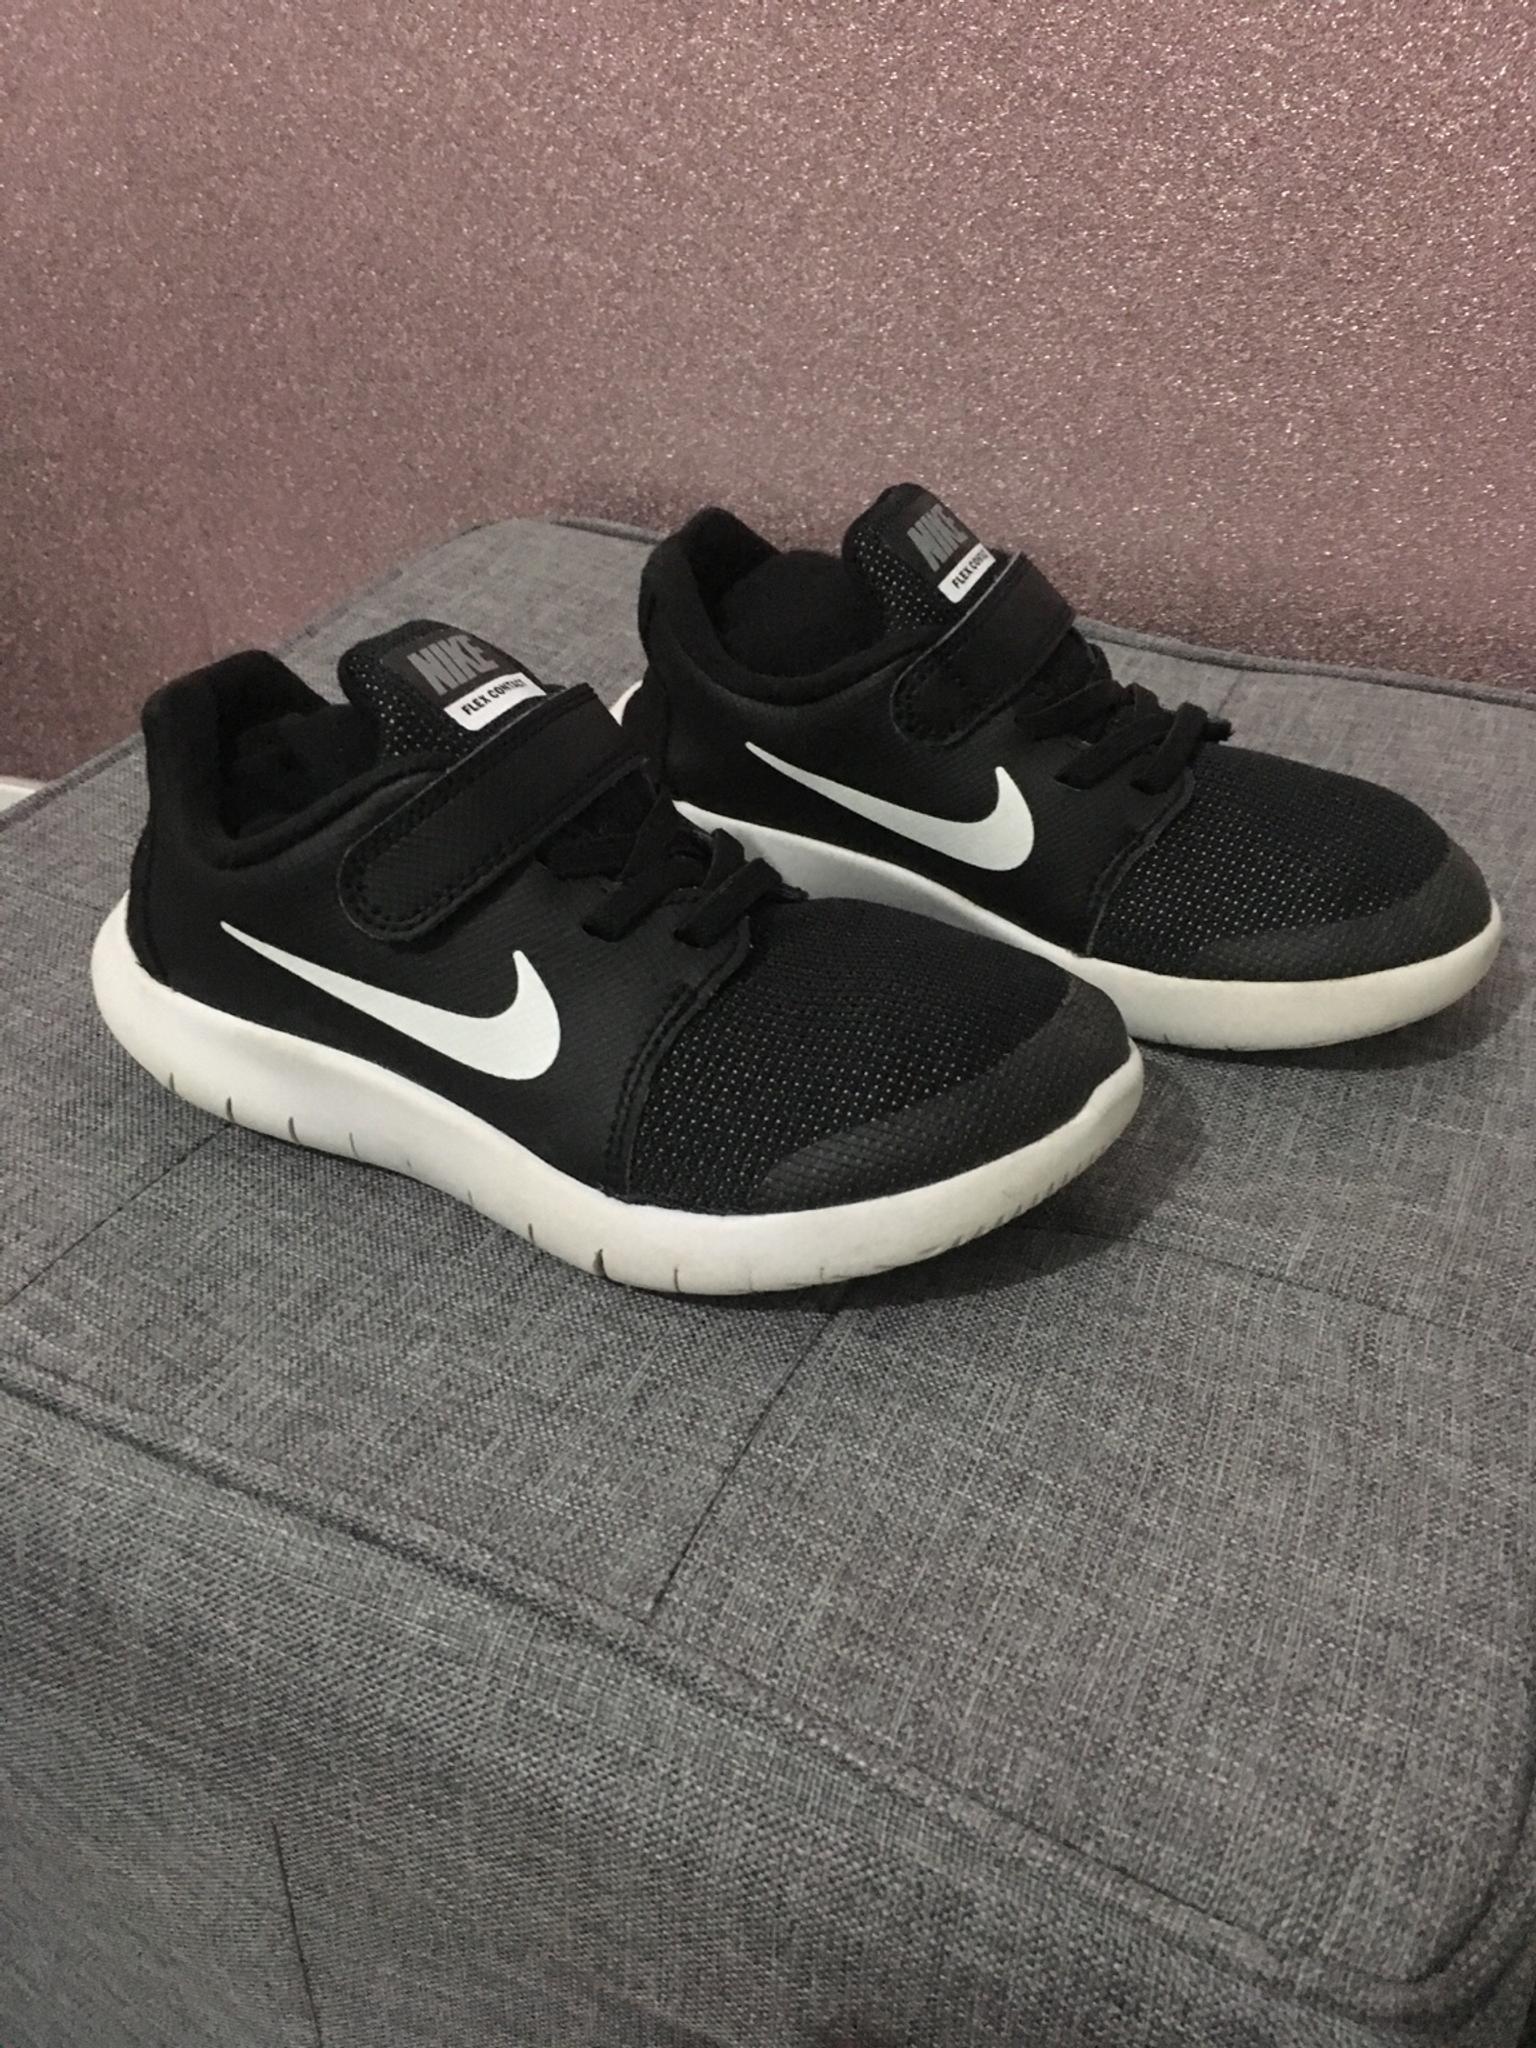 nike black with white sole